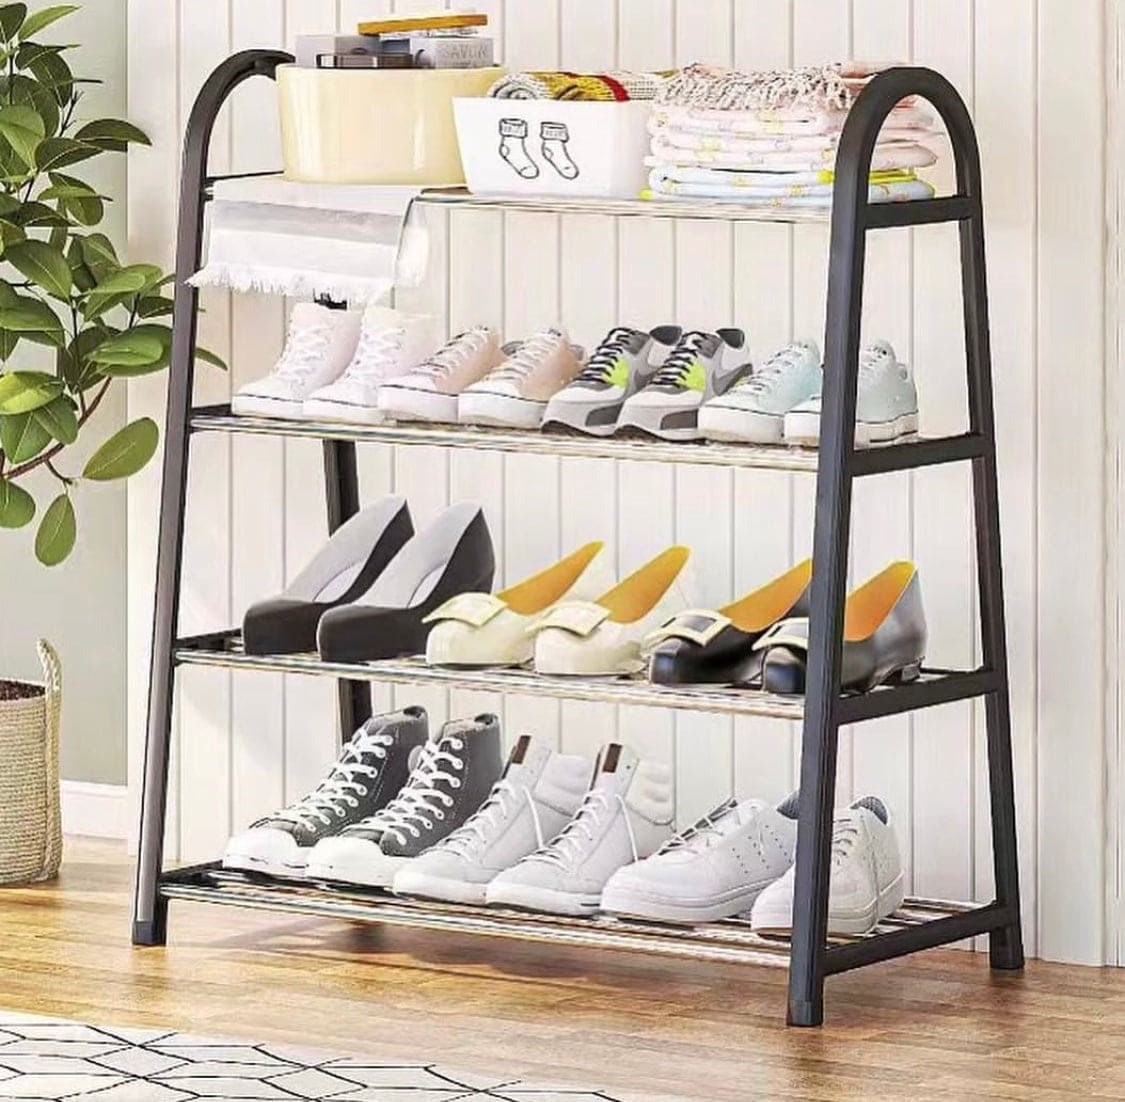 Amazing 4 Layer Shoe Rack, Multilayer Dust Proof Storage Simple Shoe Cabinet, Hallway Space Saving Shoes Rack, Space-saving Shoes Storage Organizers, Dormitory Stainless Steel Rack